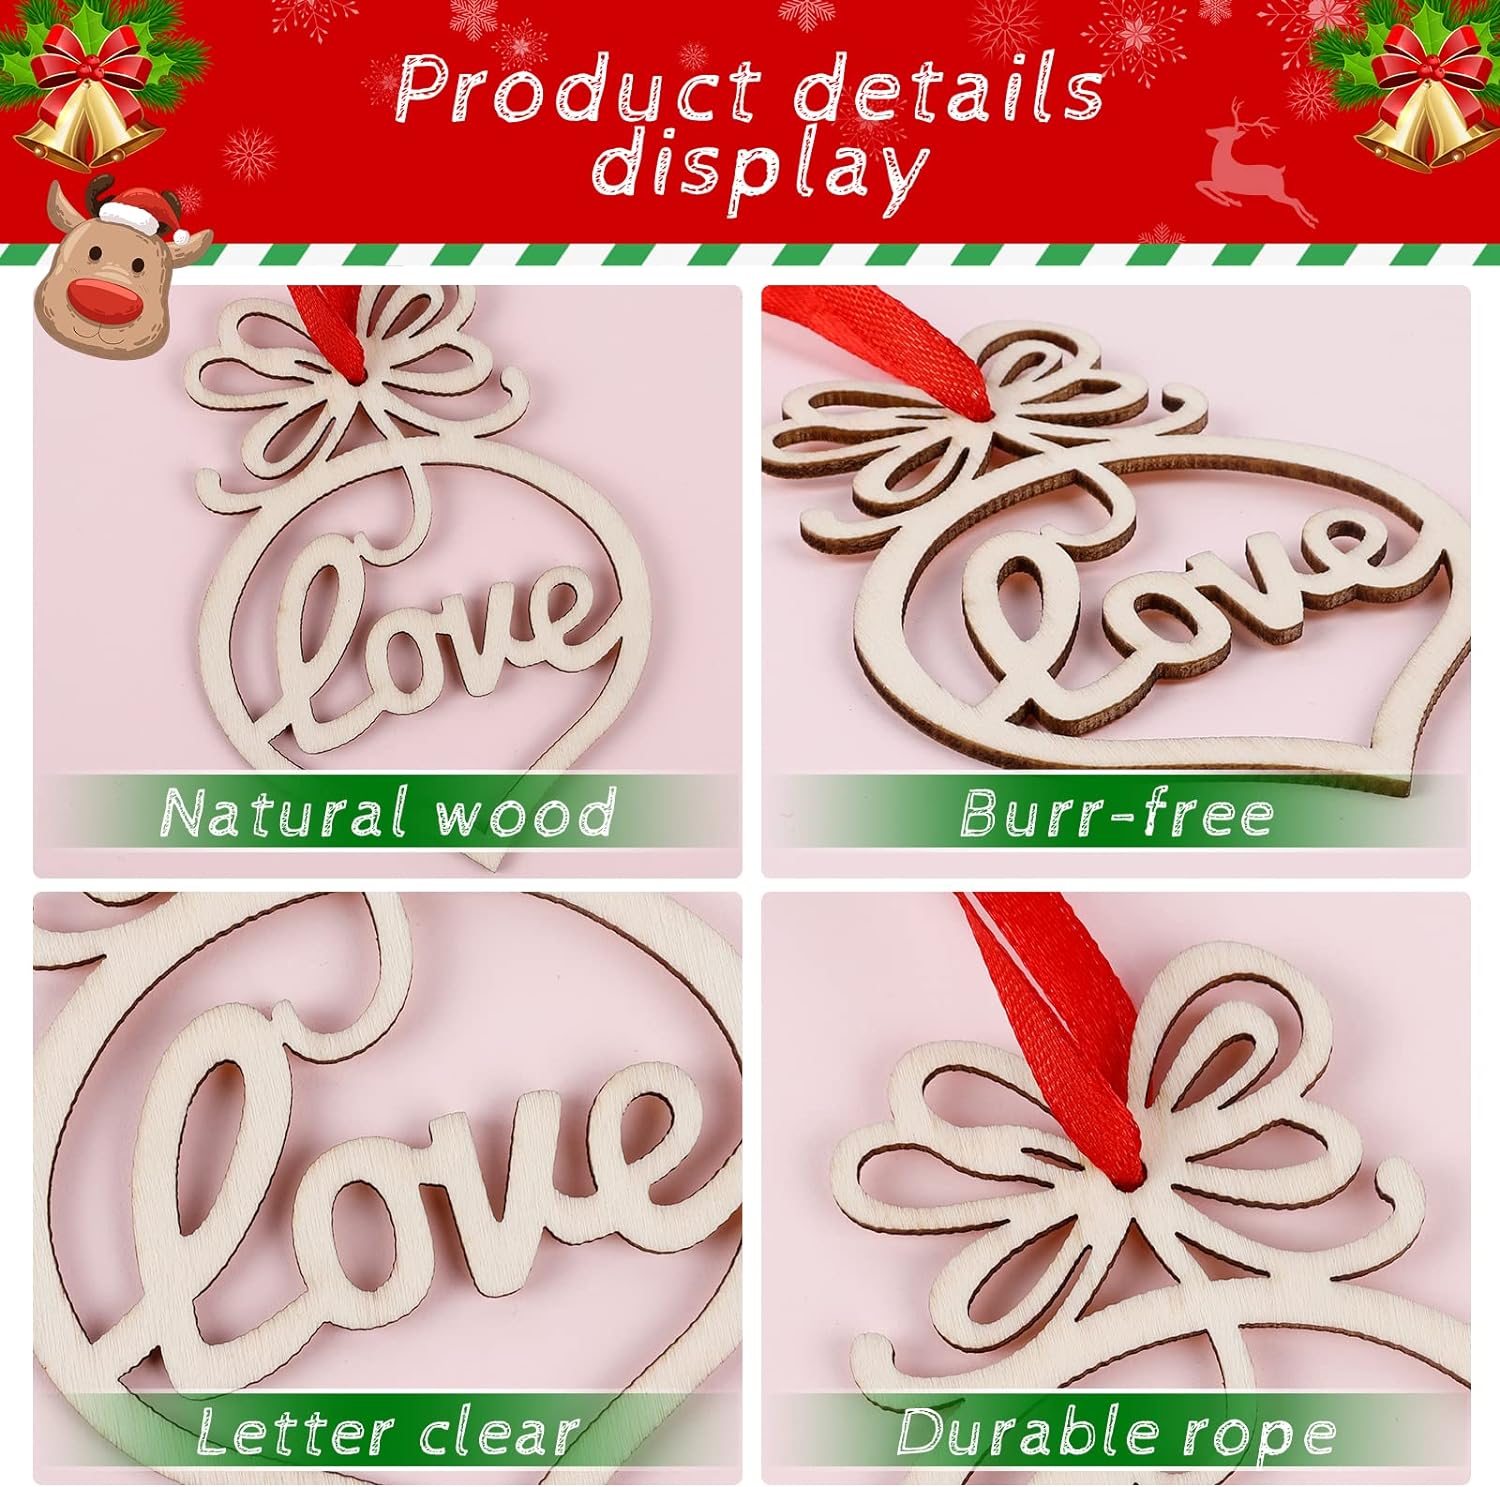 Wooden Christmas Ornaments Xmas Tree Hanging Tags Pendant Embellishments Crafts Decor for Christmas Tree Holiday Wedding Decorations with Strings, Pack of 12